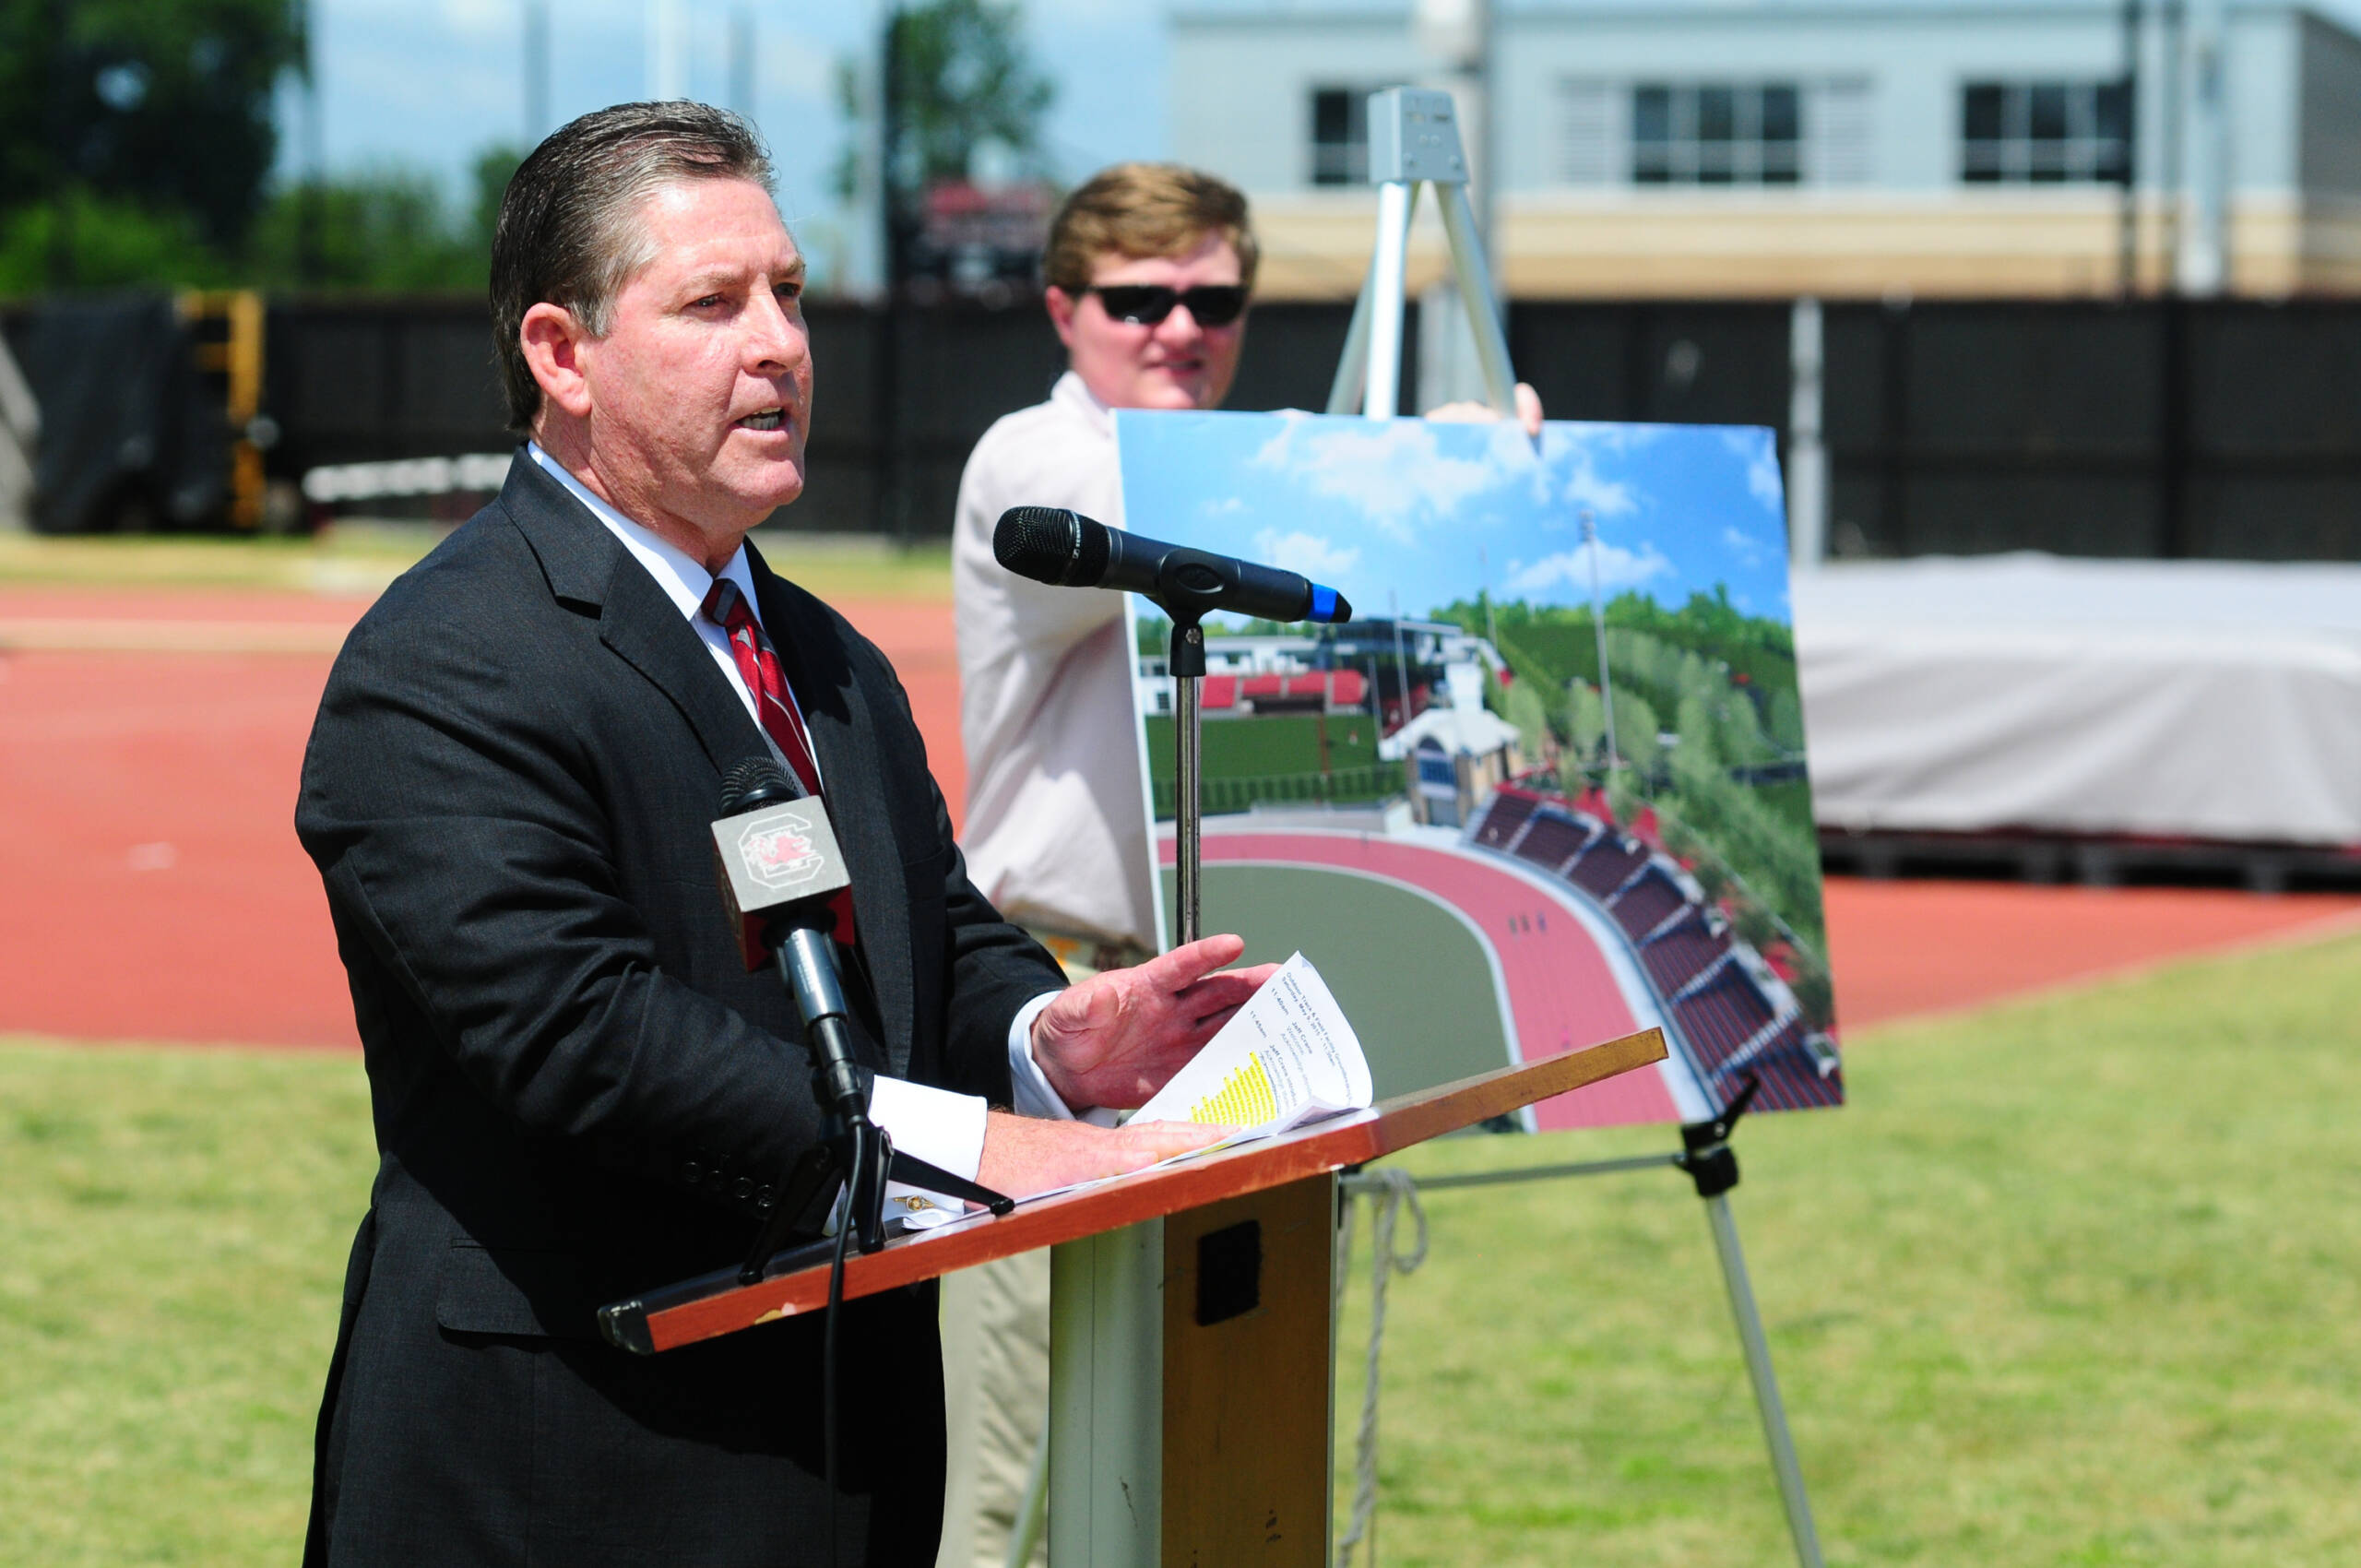 Track and Field - Groundbreaking Ceremony